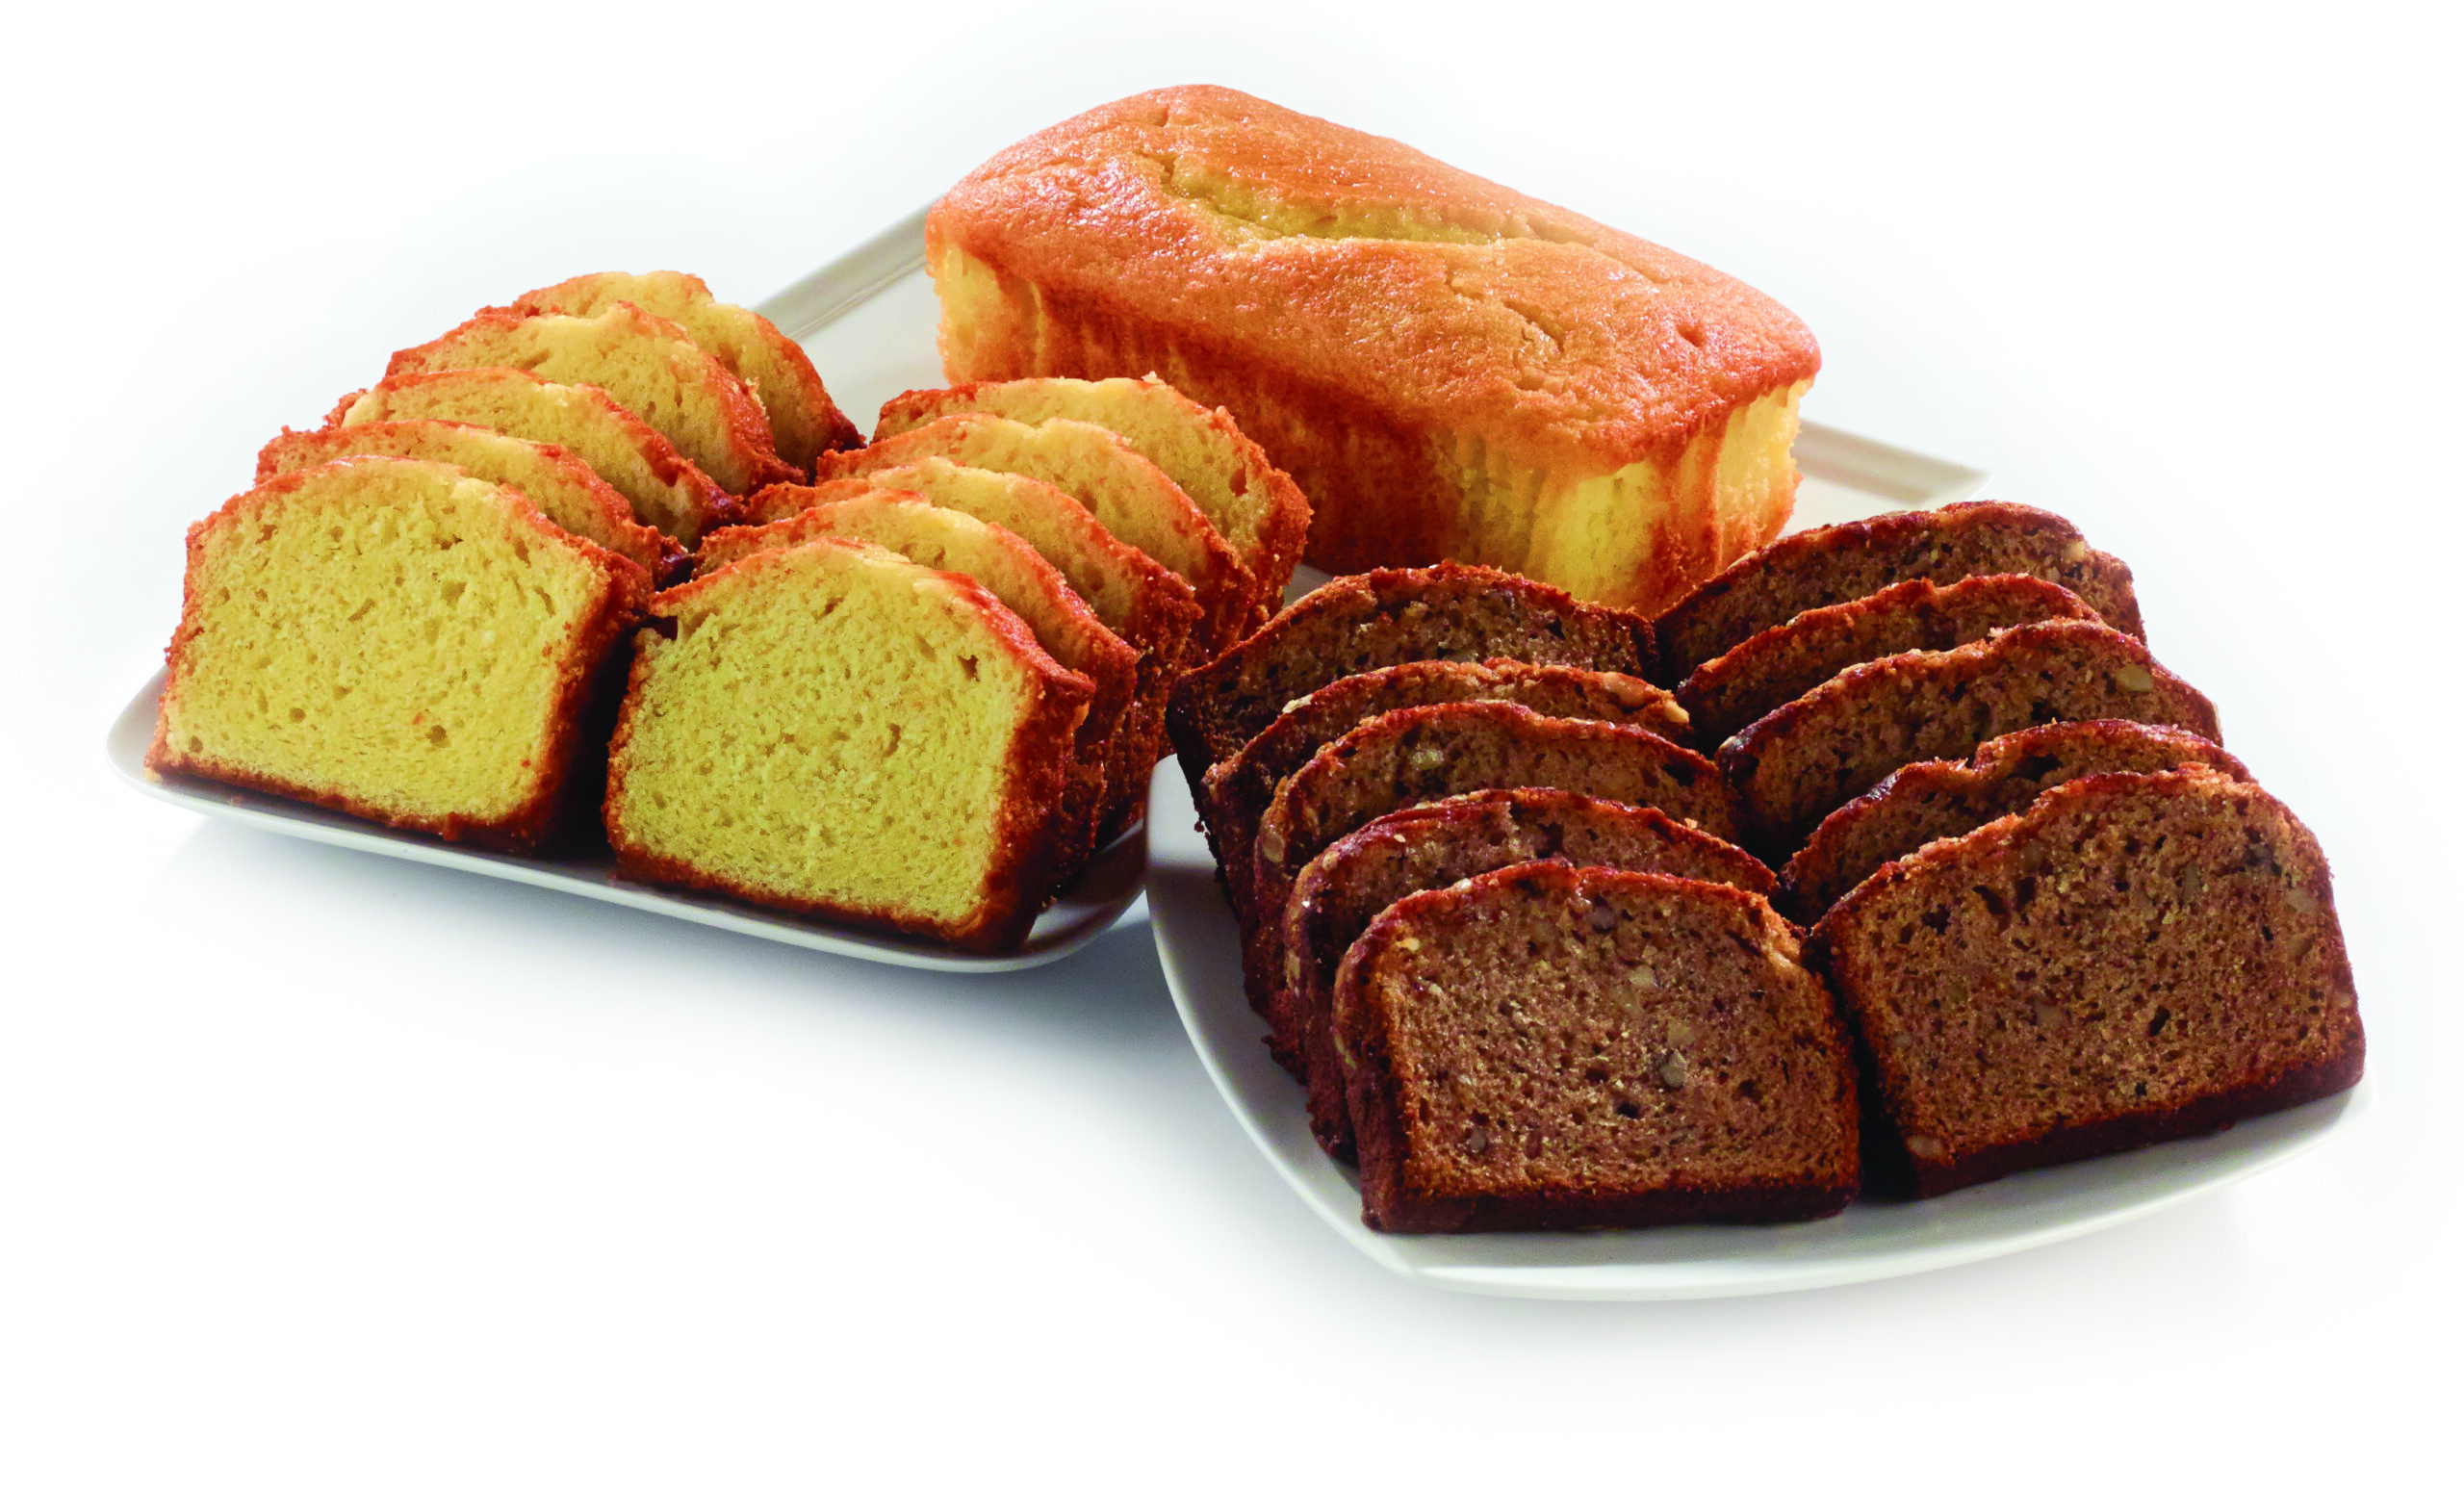 Assortment of cakes loaf and slices